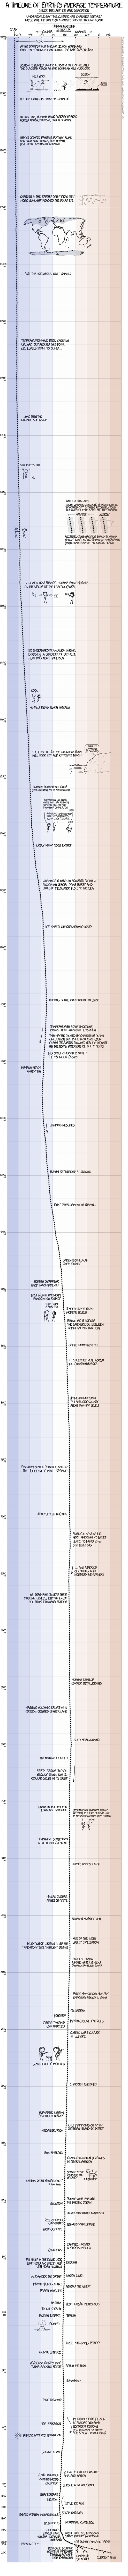 xkcd: Earth Temperature Timeline